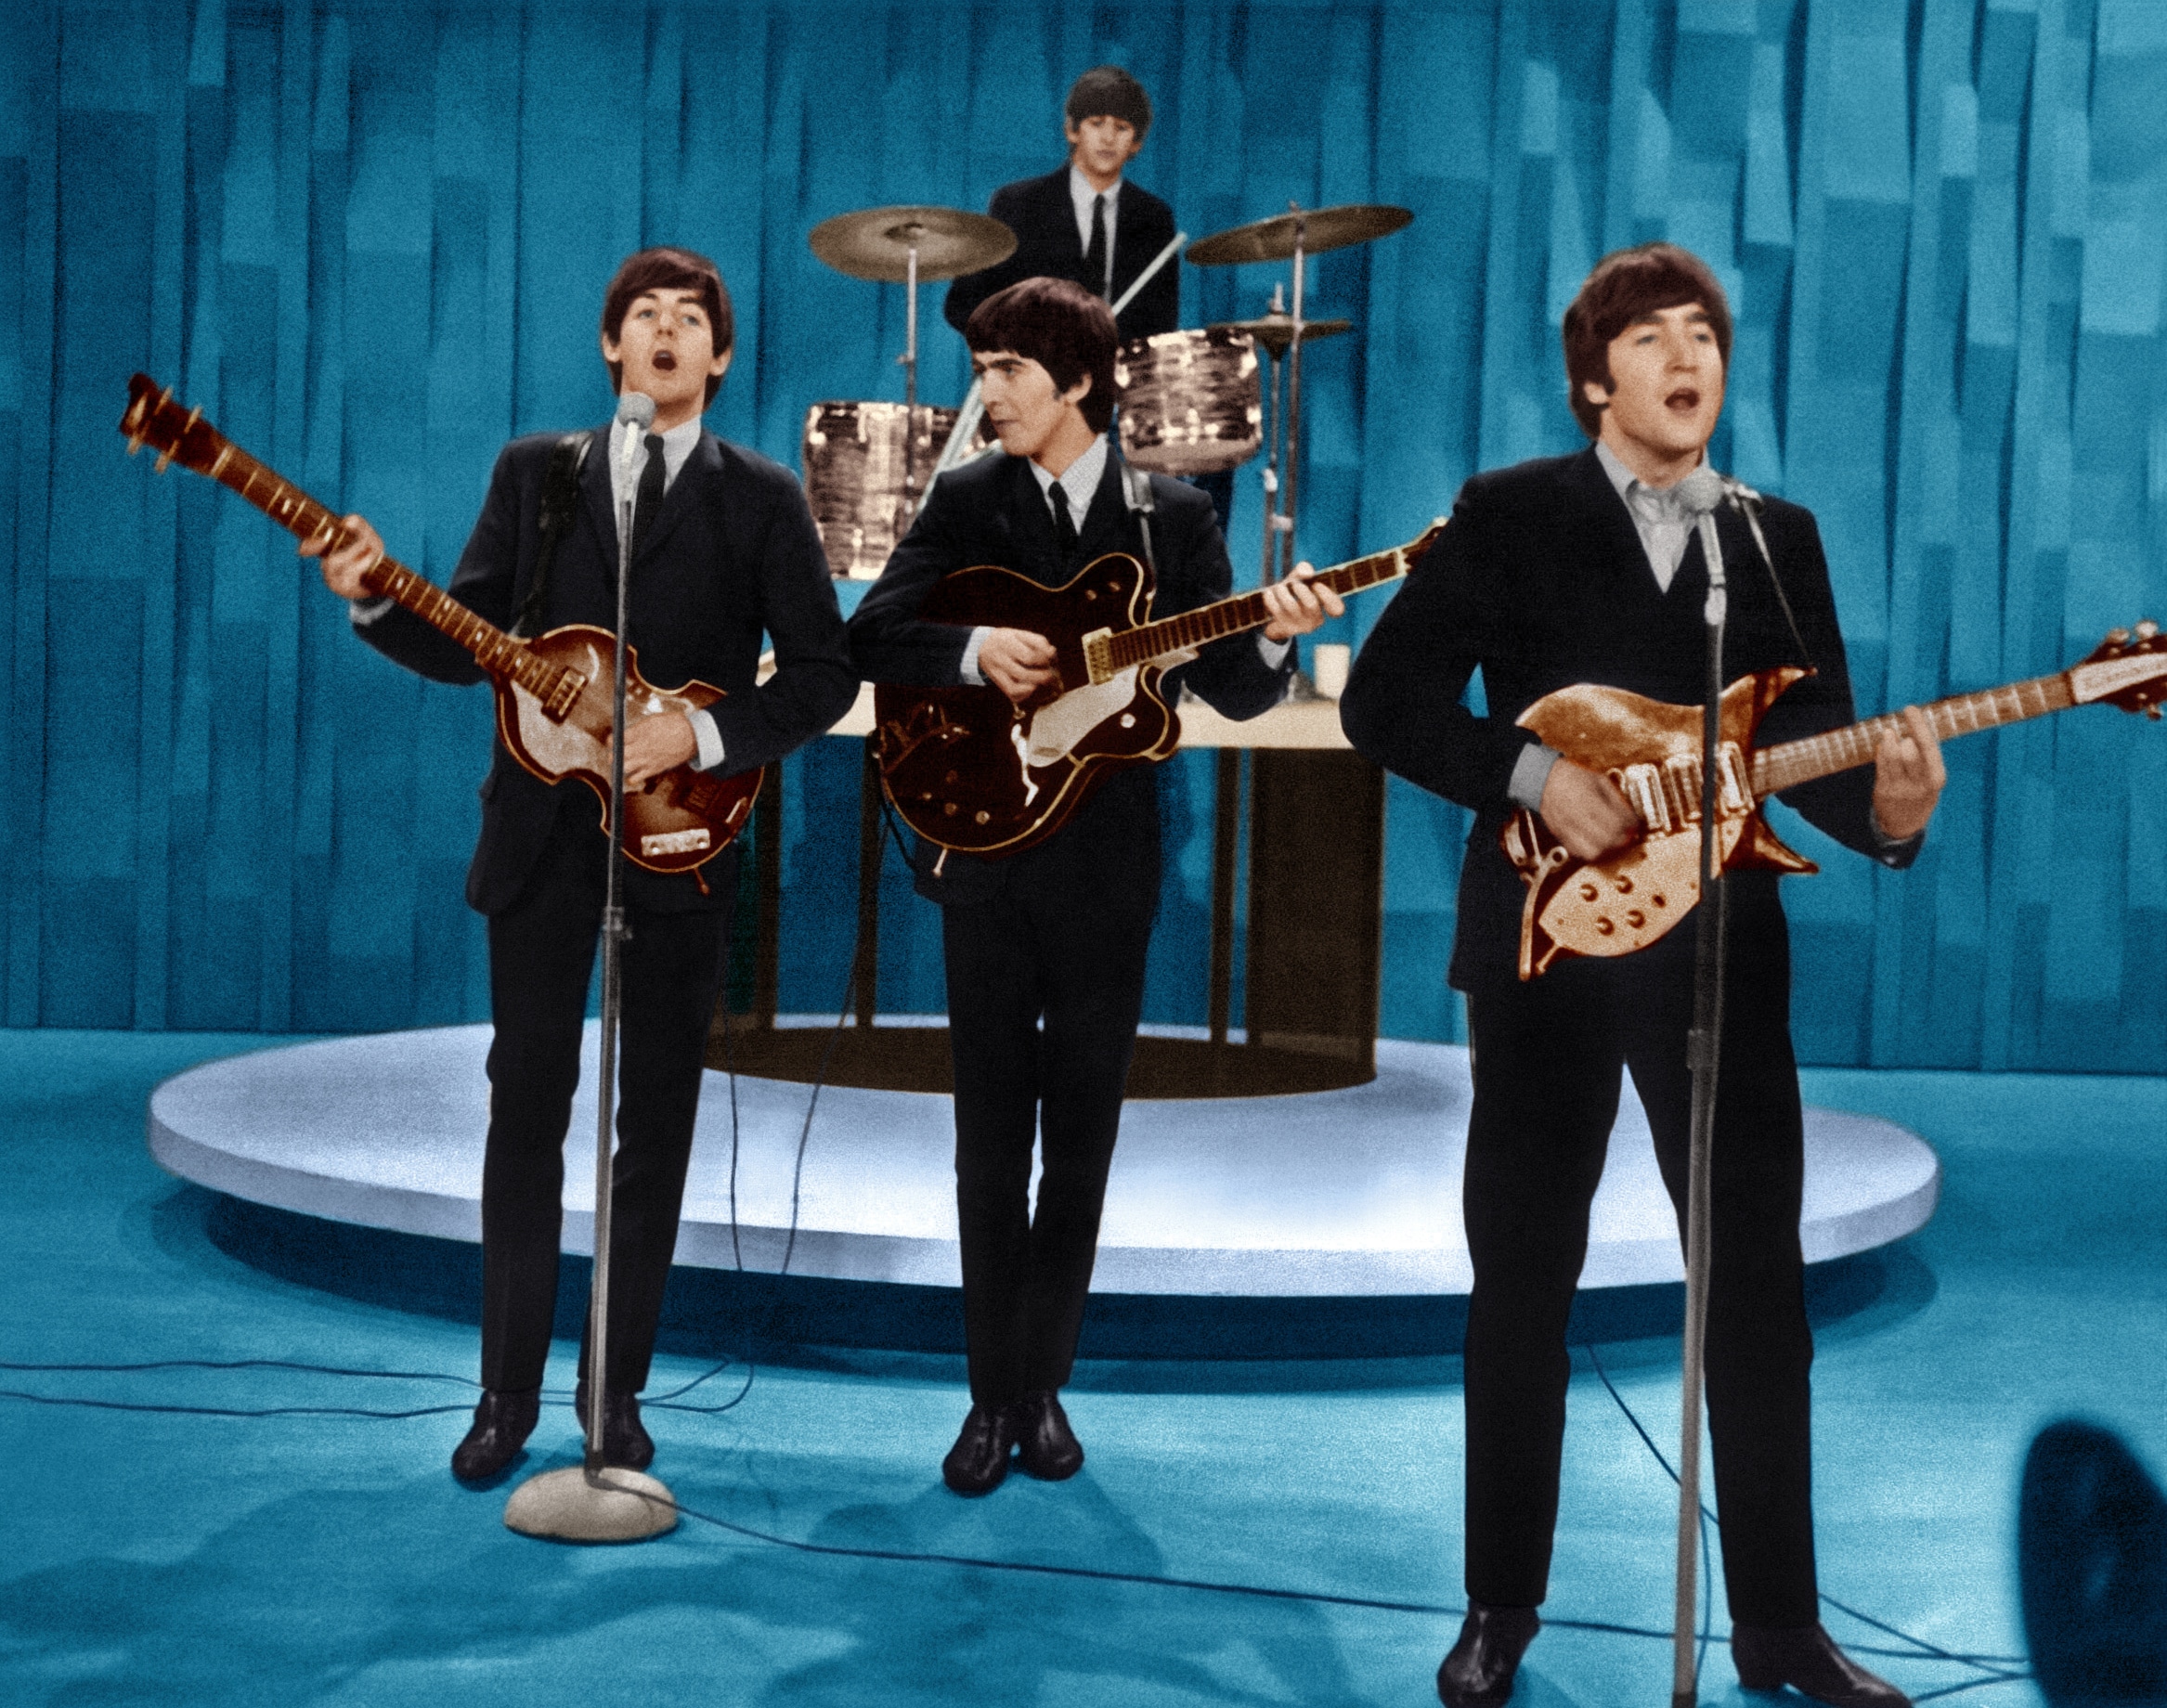 The Top 'Ed Sullivan Show' Performances That Changed History